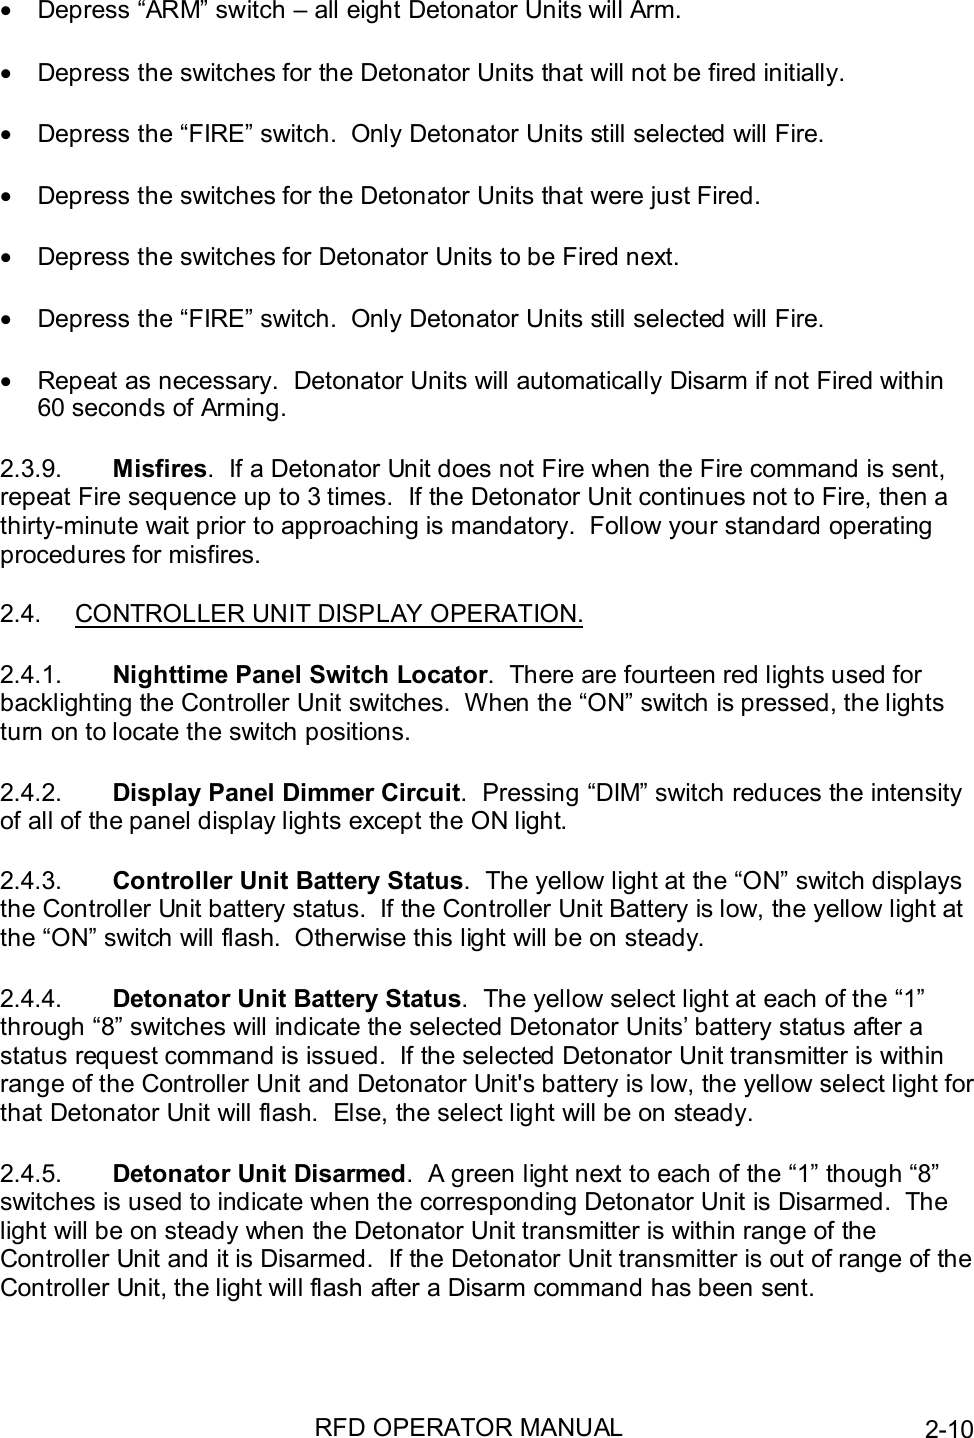 RFD OPERATOR MANUAL 2-10•  Depress “ARM” switch – all eight Detonator Units will Arm.•  Depress the switches for the Detonator Units that will not be fired initially.•  Depress the “FIRE” switch.  Only Detonator Units still selected will Fire.•  Depress the switches for the Detonator Units that were just Fired.•  Depress the switches for Detonator Units to be Fired next.•  Depress the “FIRE” switch.  Only Detonator Units still selected will Fire.•  Repeat as necessary.  Detonator Units will automatically Disarm if not Fired within60 seconds of Arming.2.3.9.  Misfires.  If a Detonator Unit does not Fire when the Fire command is sent,repeat Fire sequence up to 3 times.  If the Detonator Unit continues not to Fire, then athirty-minute wait prior to approaching is mandatory.  Follow your standard operatingprocedures for misfires.2.4.  CONTROLLER UNIT DISPLAY OPERATION.2.4.1.  Nighttime Panel Switch Locator.  There are fourteen red lights used forbacklighting the Controller Unit switches.  When the “ON” switch is pressed, the lightsturn on to locate the switch positions.2.4.2.  Display Panel Dimmer Circuit.  Pressing “DIM” switch reduces the intensityof all of the panel display lights except the ON light.2.4.3.  Controller Unit Battery Status.  The yellow light at the “ON” switch displaysthe Controller Unit battery status.  If the Controller Unit Battery is low, the yellow light atthe “ON” switch will flash.  Otherwise this light will be on steady.2.4.4.  Detonator Unit Battery Status.  The yellow select light at each of the “1”through “8” switches will indicate the selected Detonator Units’ battery status after astatus request command is issued.  If the selected Detonator Unit transmitter is withinrange of the Controller Unit and Detonator Unit&apos;s battery is low, the yellow select light forthat Detonator Unit will flash.  Else, the select light will be on steady.2.4.5.  Detonator Unit Disarmed.  A green light next to each of the “1” though “8”switches is used to indicate when the corresponding Detonator Unit is Disarmed.  Thelight will be on steady when the Detonator Unit transmitter is within range of theController Unit and it is Disarmed.  If the Detonator Unit transmitter is out of range of theController Unit, the light will flash after a Disarm command has been sent.